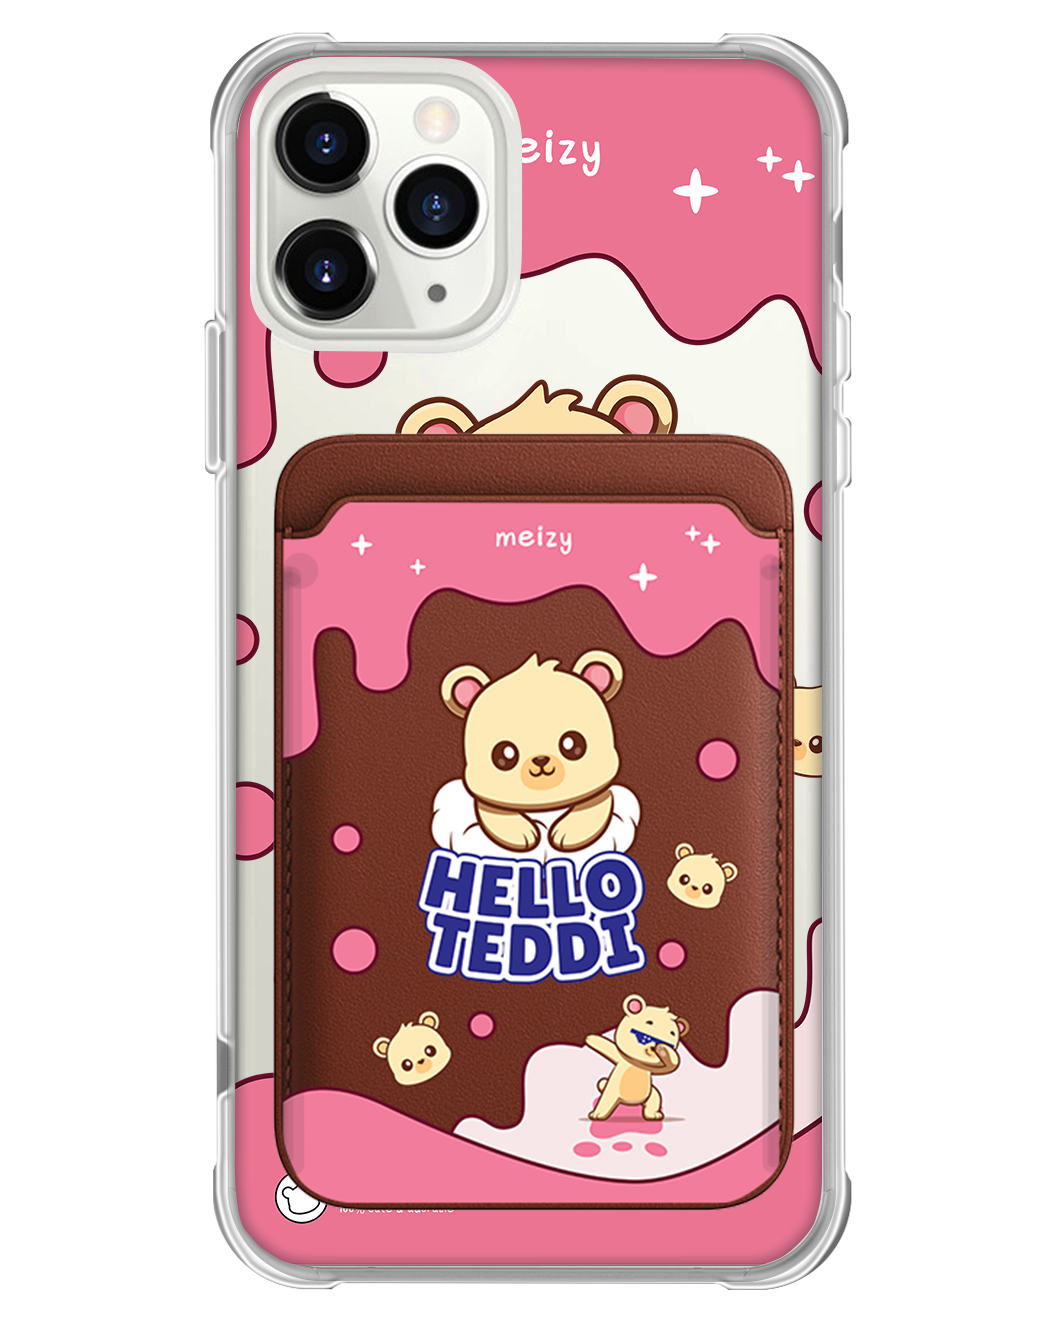 iPhone Magnetic Wallet Case - Hello Teddy 2.0